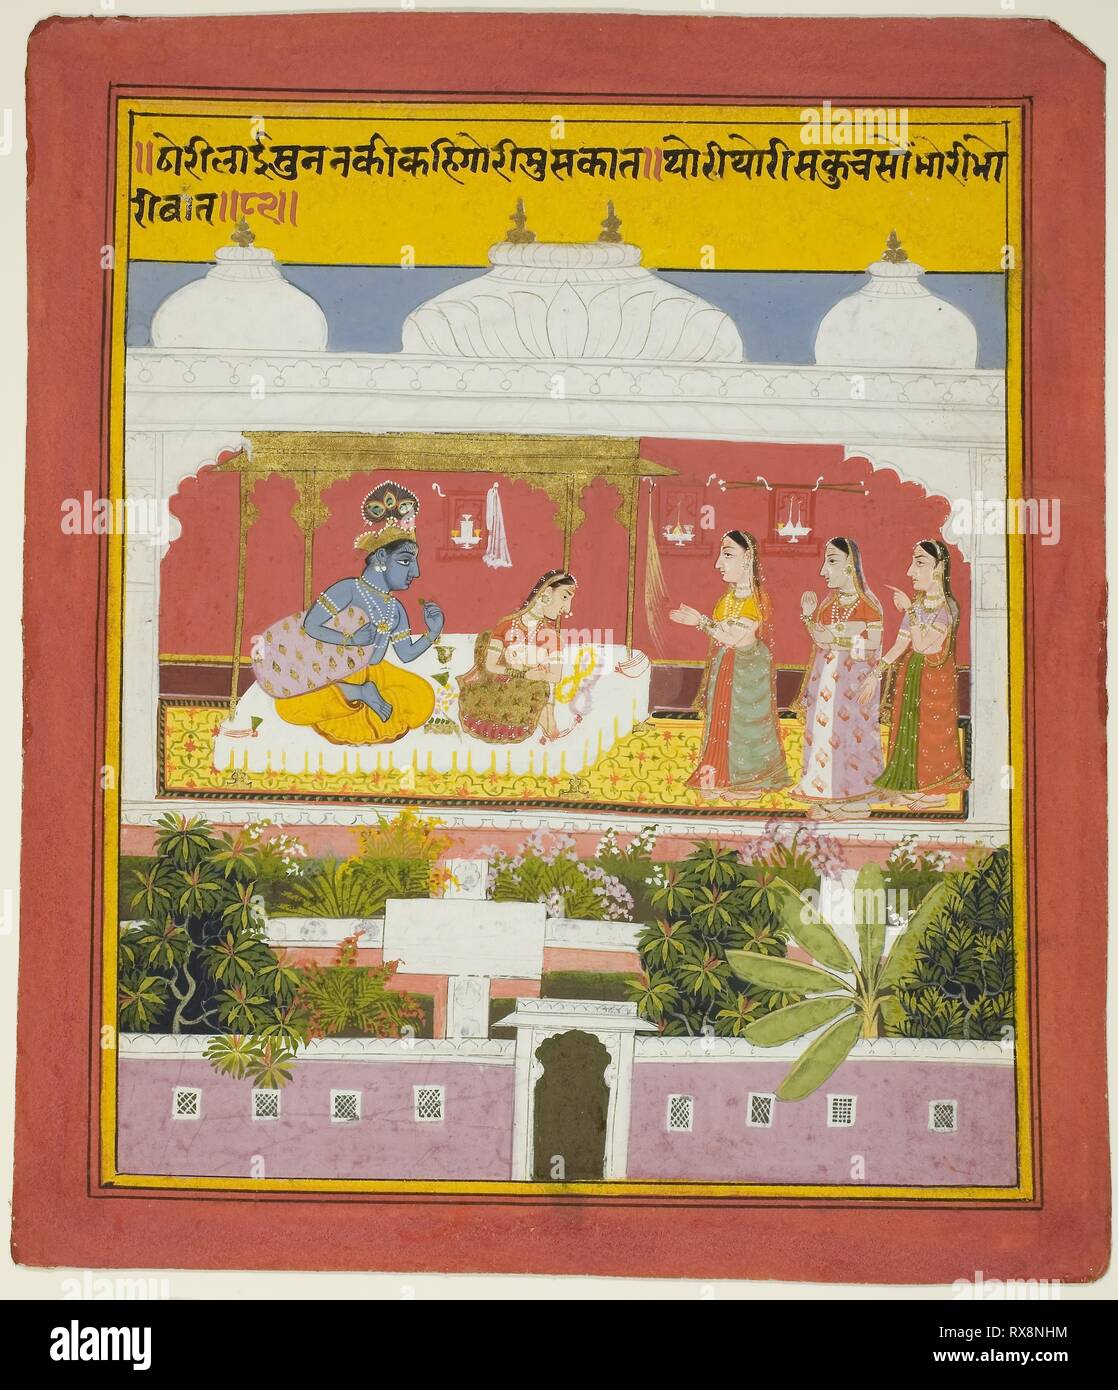 Krishna and Radha in a Pavilion, page from a copy of the Sat Sai Seven Hundred Verses). India; Rajasthan, Mewar. Date: 1714-1724. Dimensions: Image: 21.1 x 17.6 cm; Border: 22.2 x 18.7 cm; Paper: 25.1 x 21.5 cm  (Image: 8 1/4 x 6 7/8 in.; Border: 8 3/4 x 7 3/8 in.; Paper: 9 7/8 x 8 1/2 in.). Opaque watercolor and gold on paper. Origin: India. Museum: The Chicago Art Institute. Stock Photo